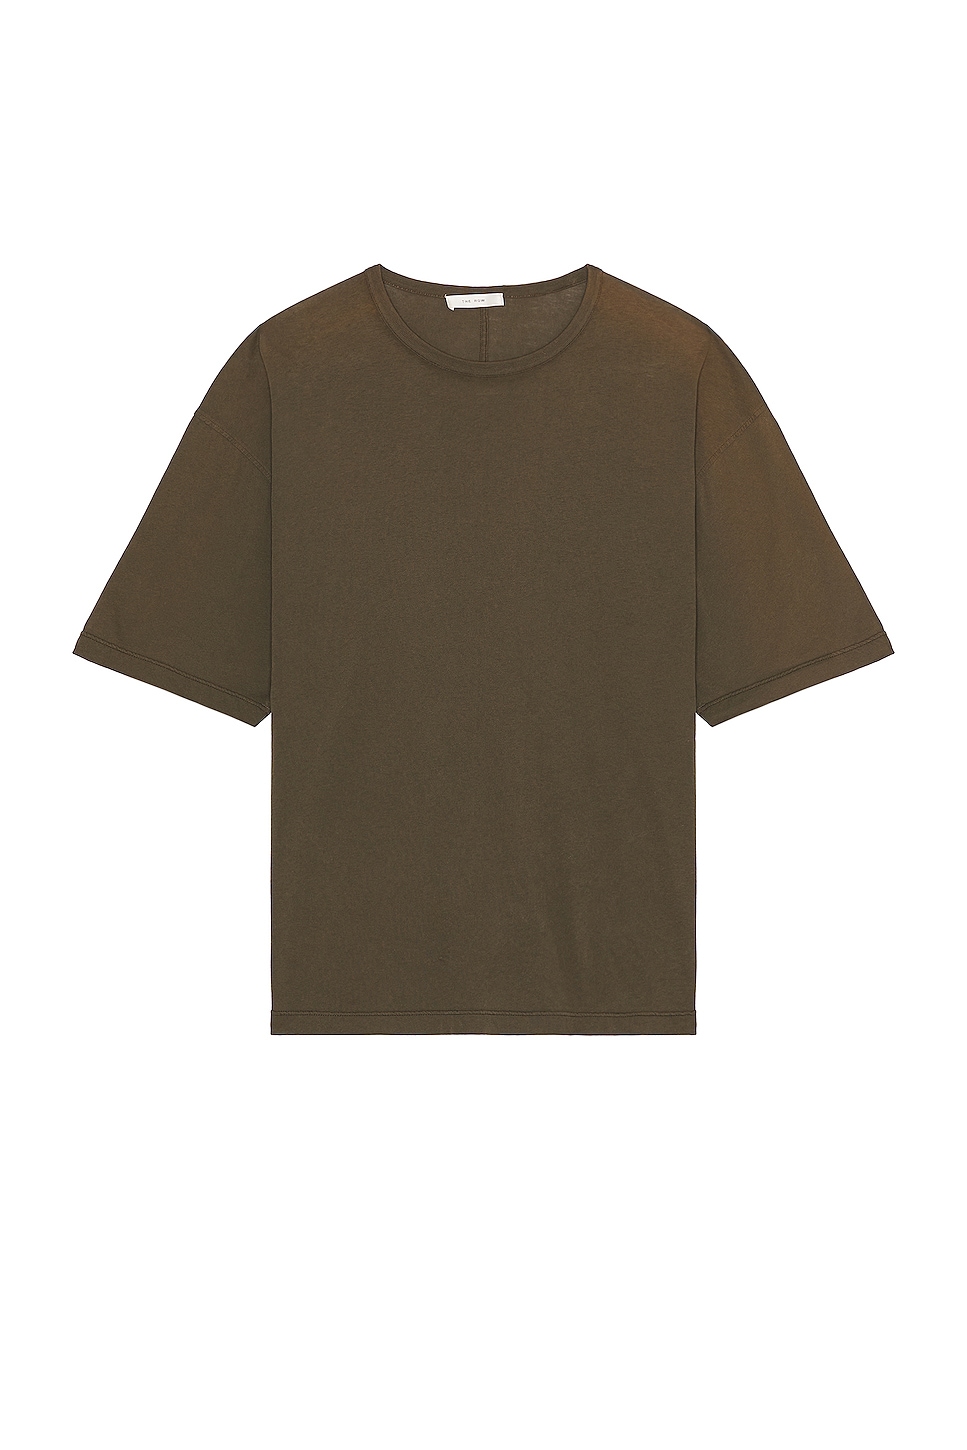 Image 1 of The Row Steven Top in Grey Taupe